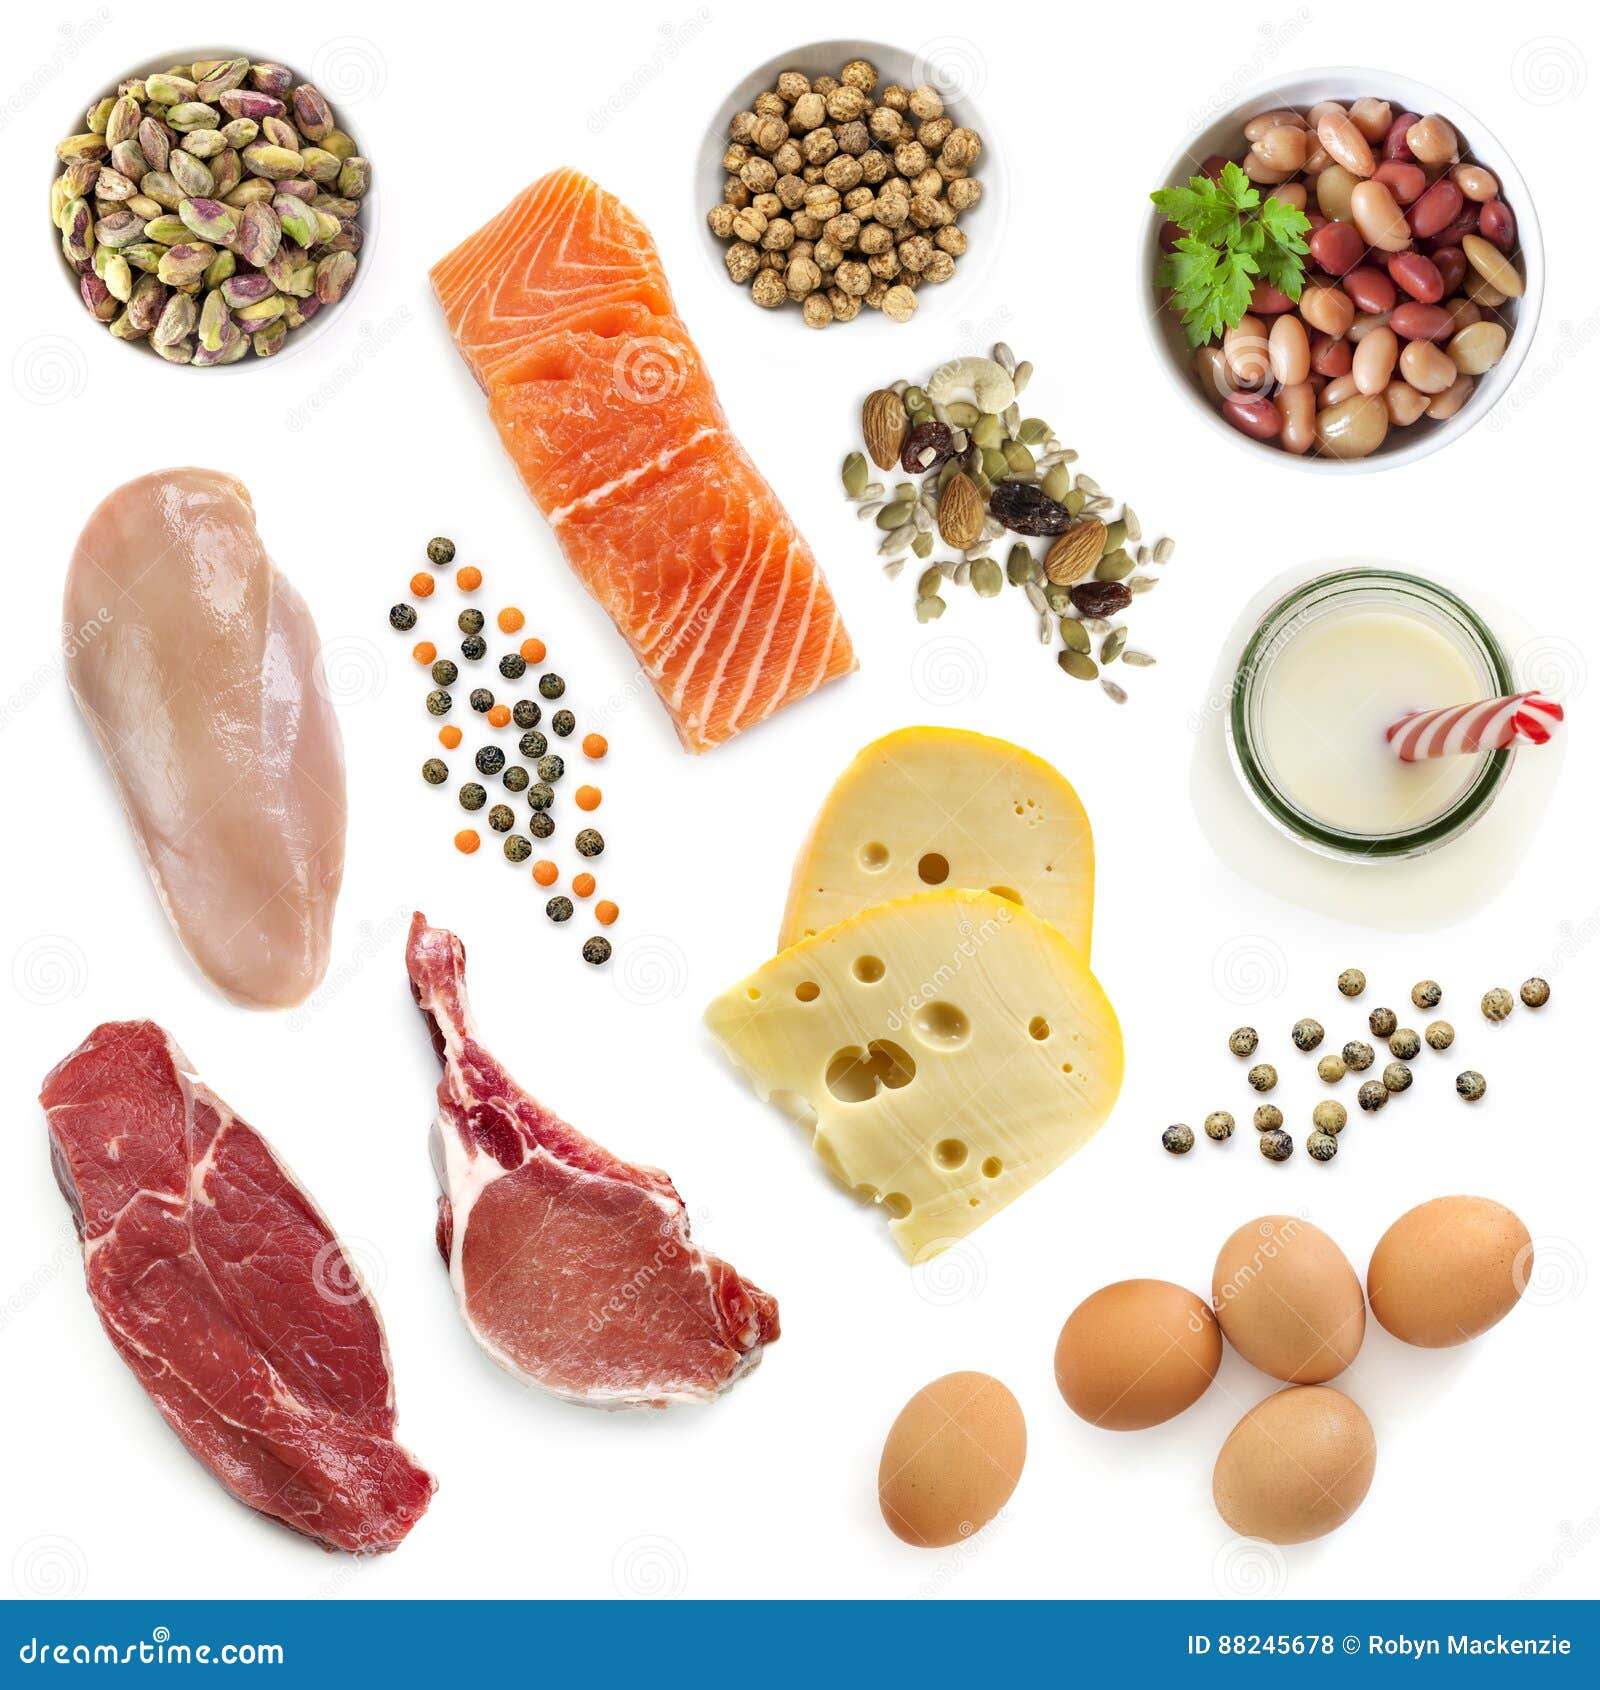 food sources of protein  top view